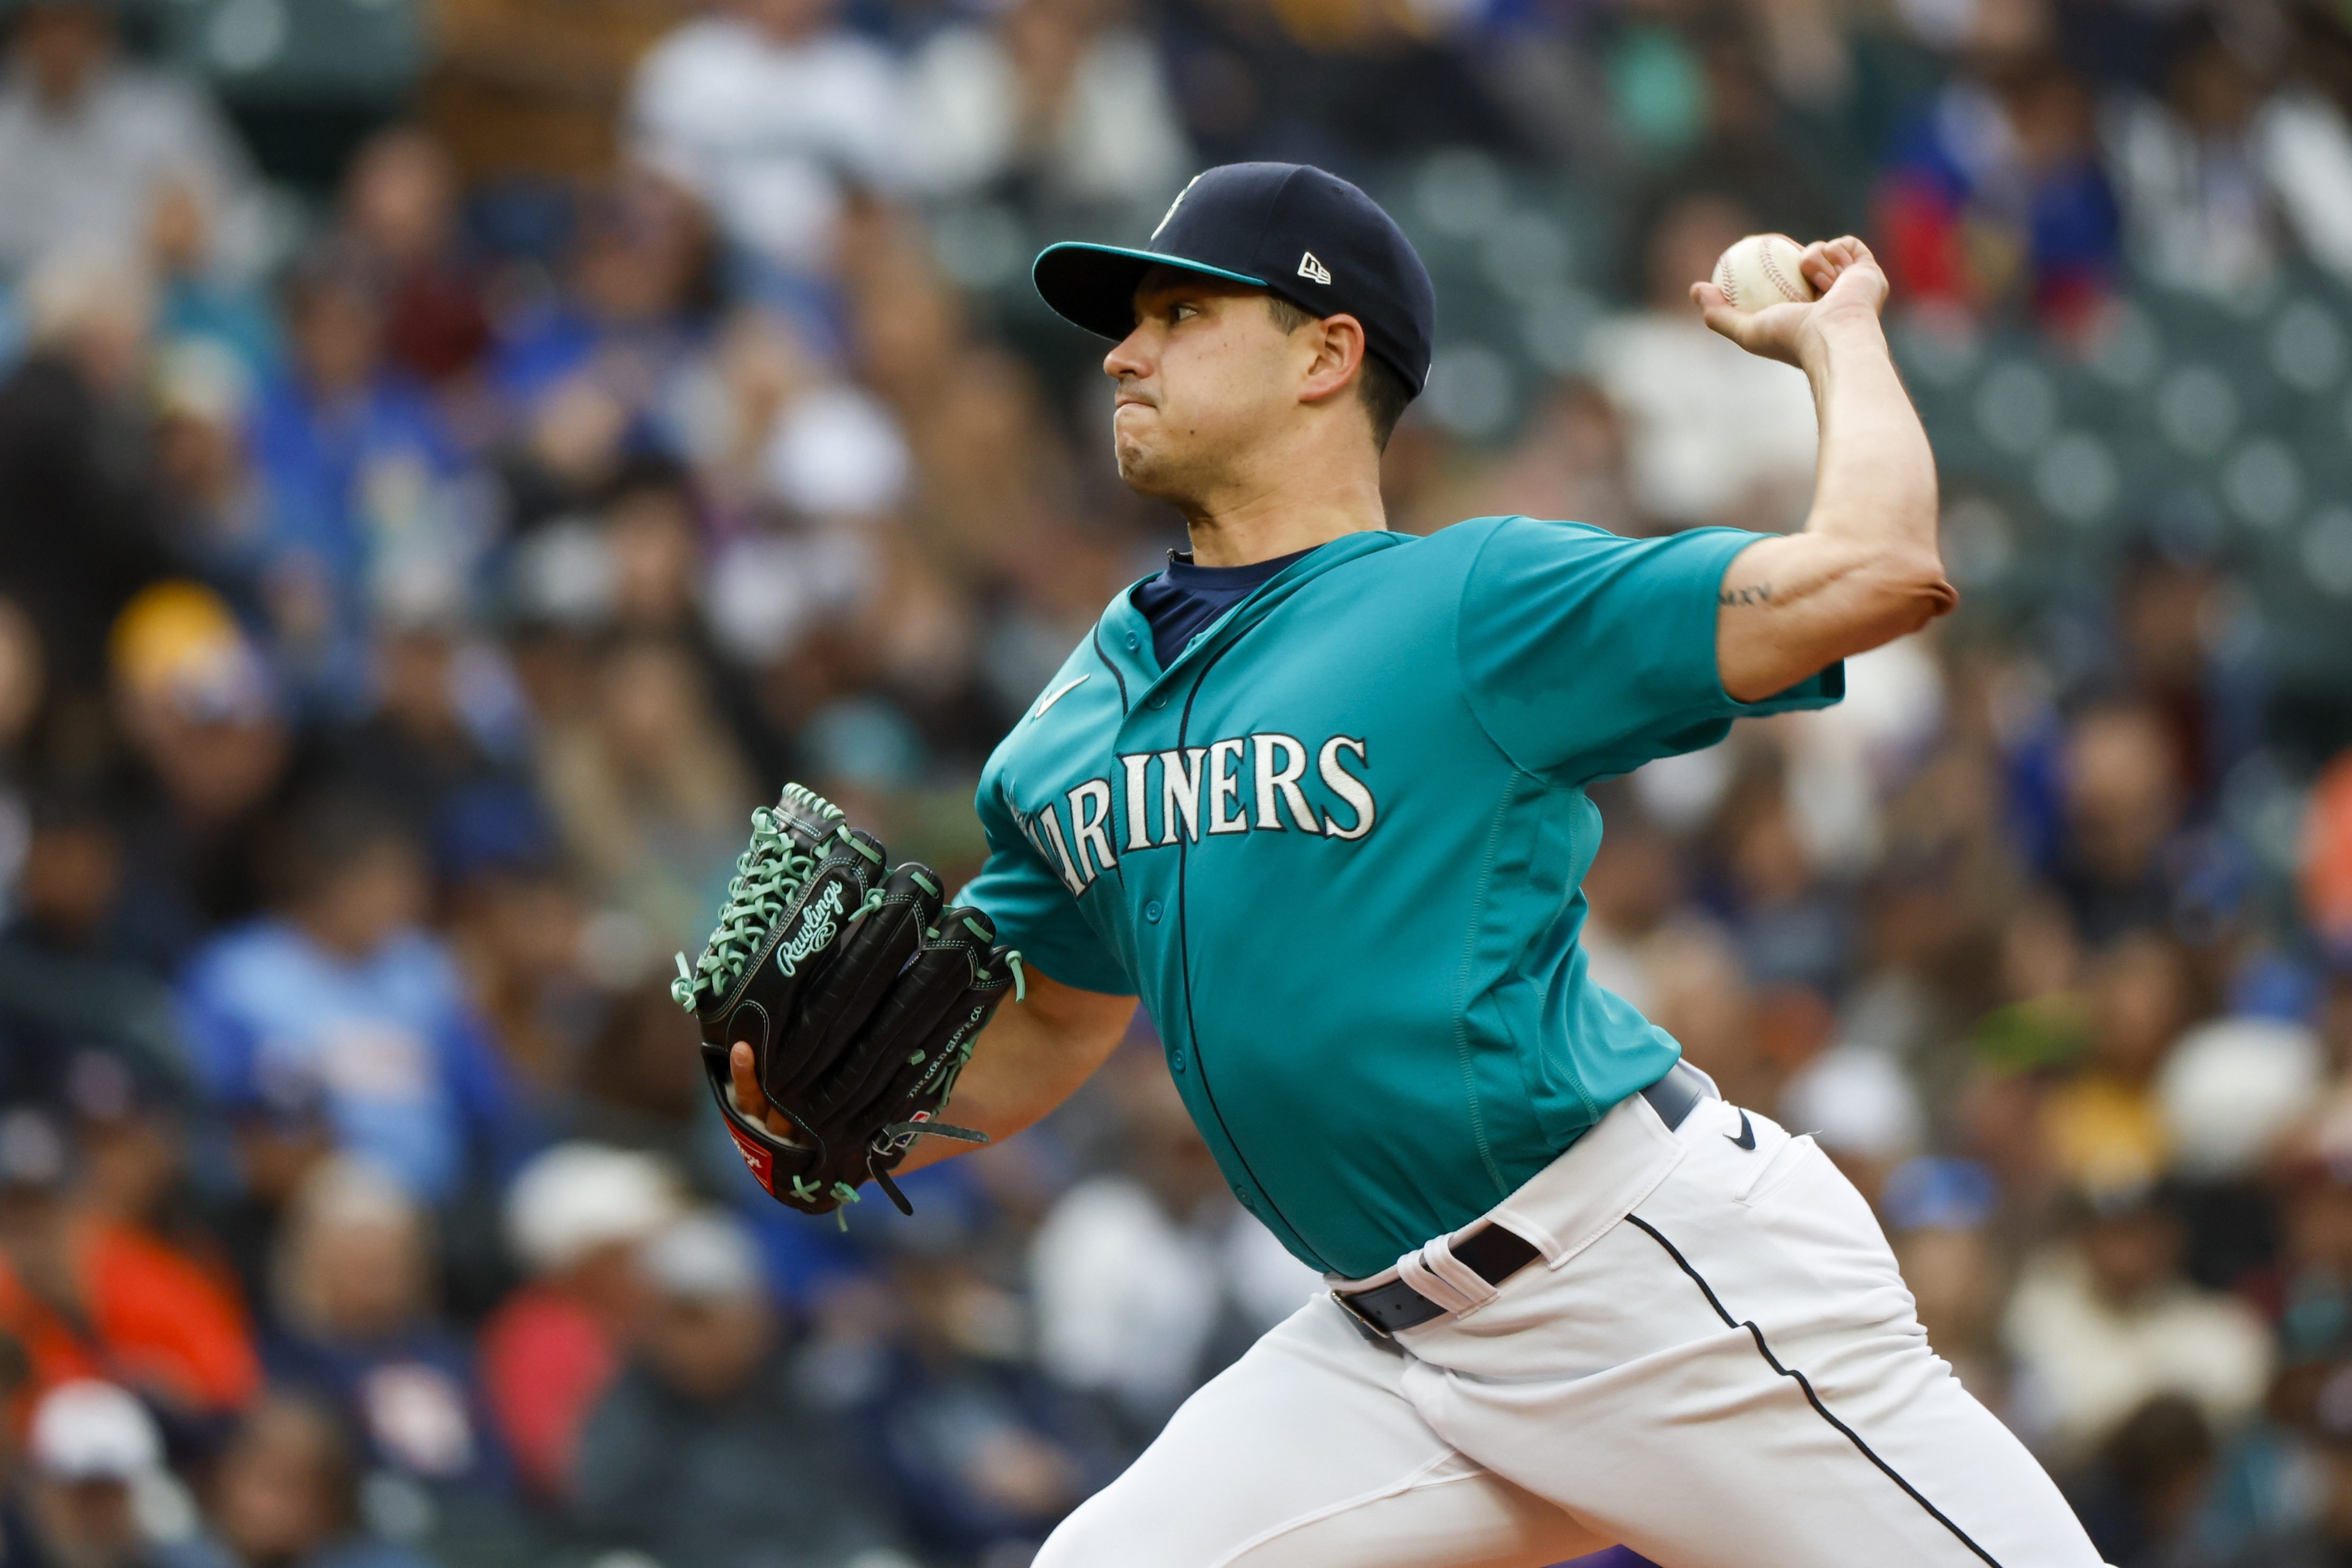 Mariners rally for seven runs in 8th to stun Astros